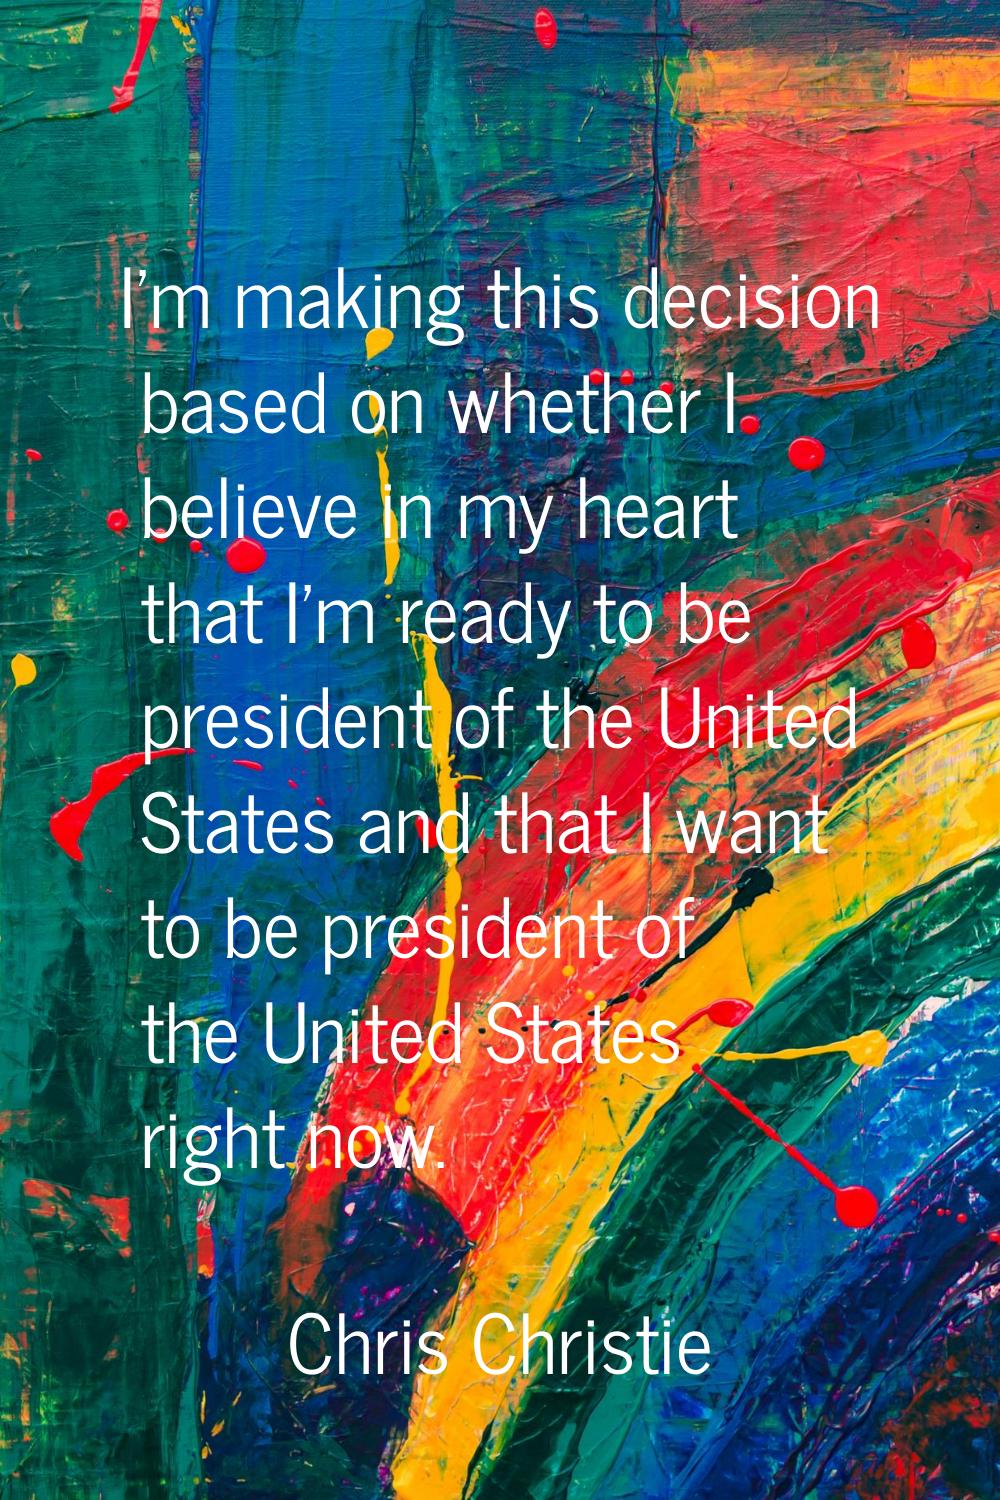 I'm making this decision based on whether I believe in my heart that I'm ready to be president of t